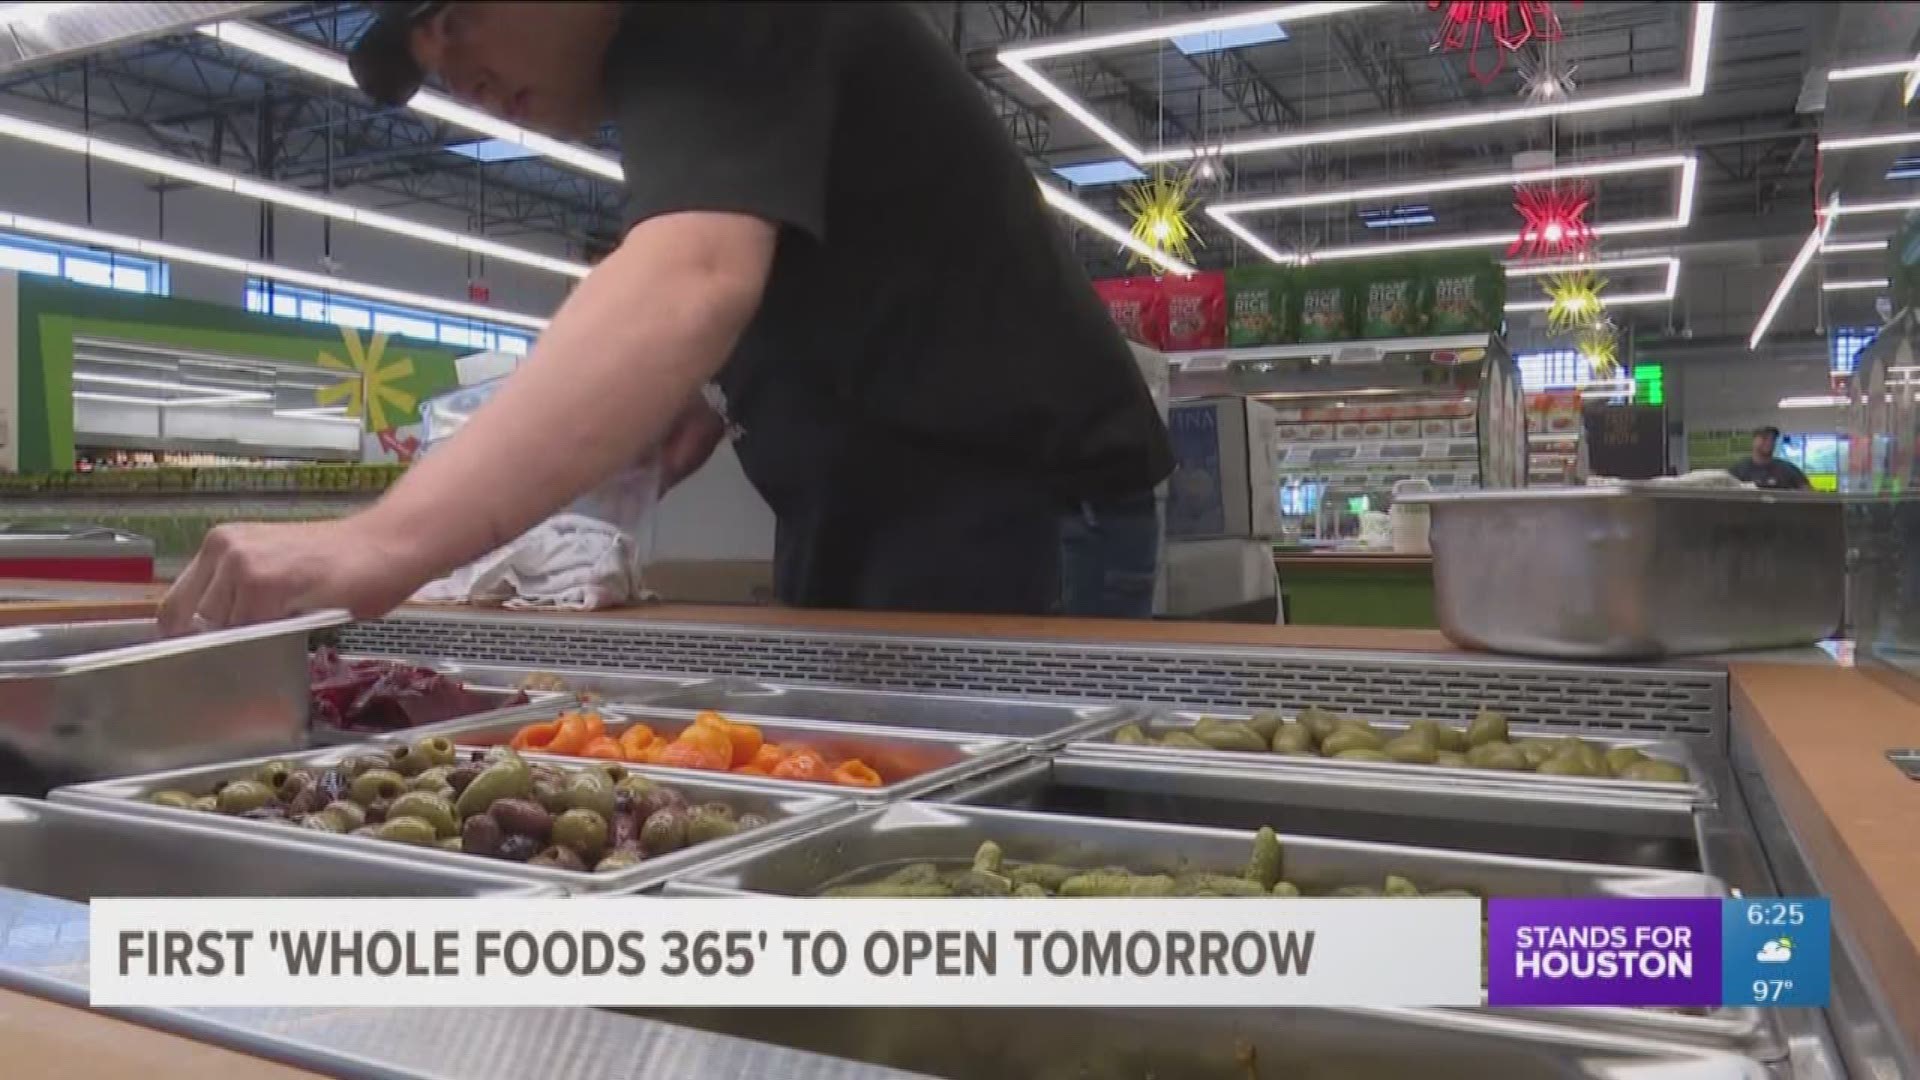 Houstonians will finally get to shop at Whole Foods Market's 365 grocery store. The new concept aims to make fresh and healthy foods more affordable.